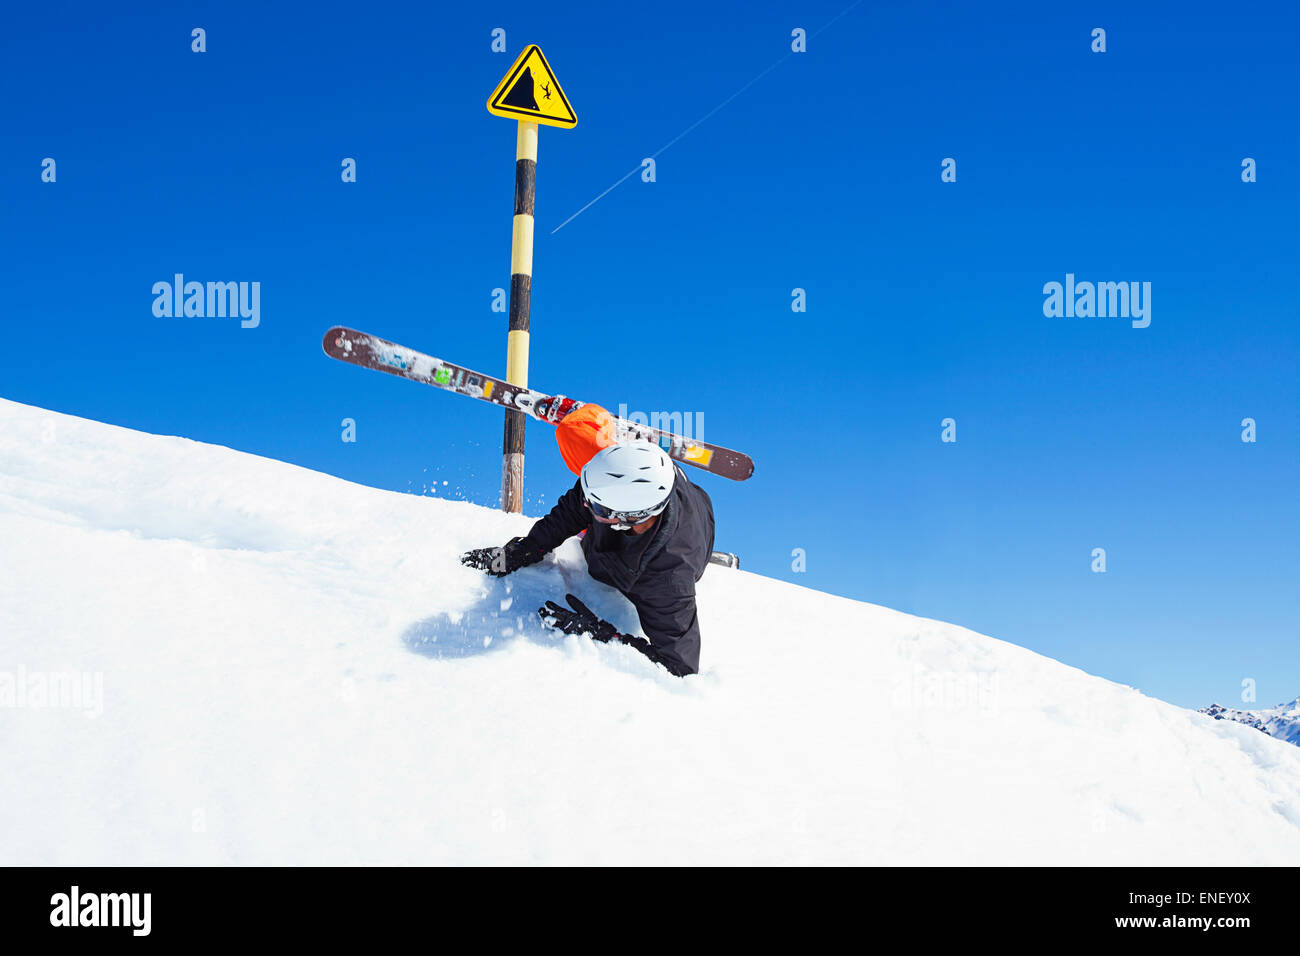 Man falls in front of ski hazard sign in the snow Stock Photo